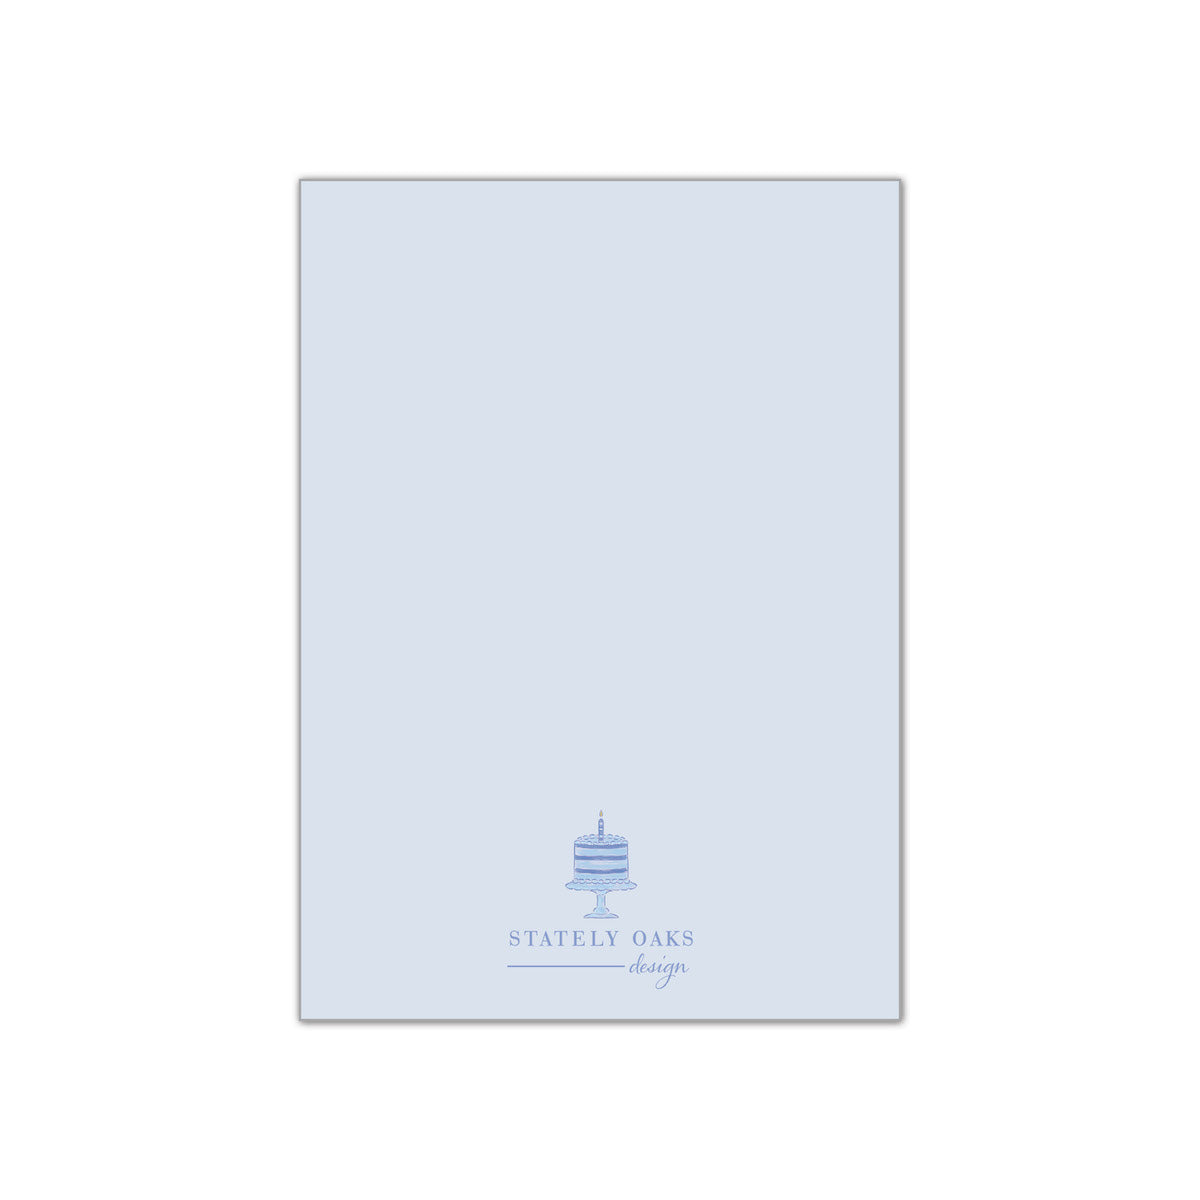 One Little Candle Blue Invitation